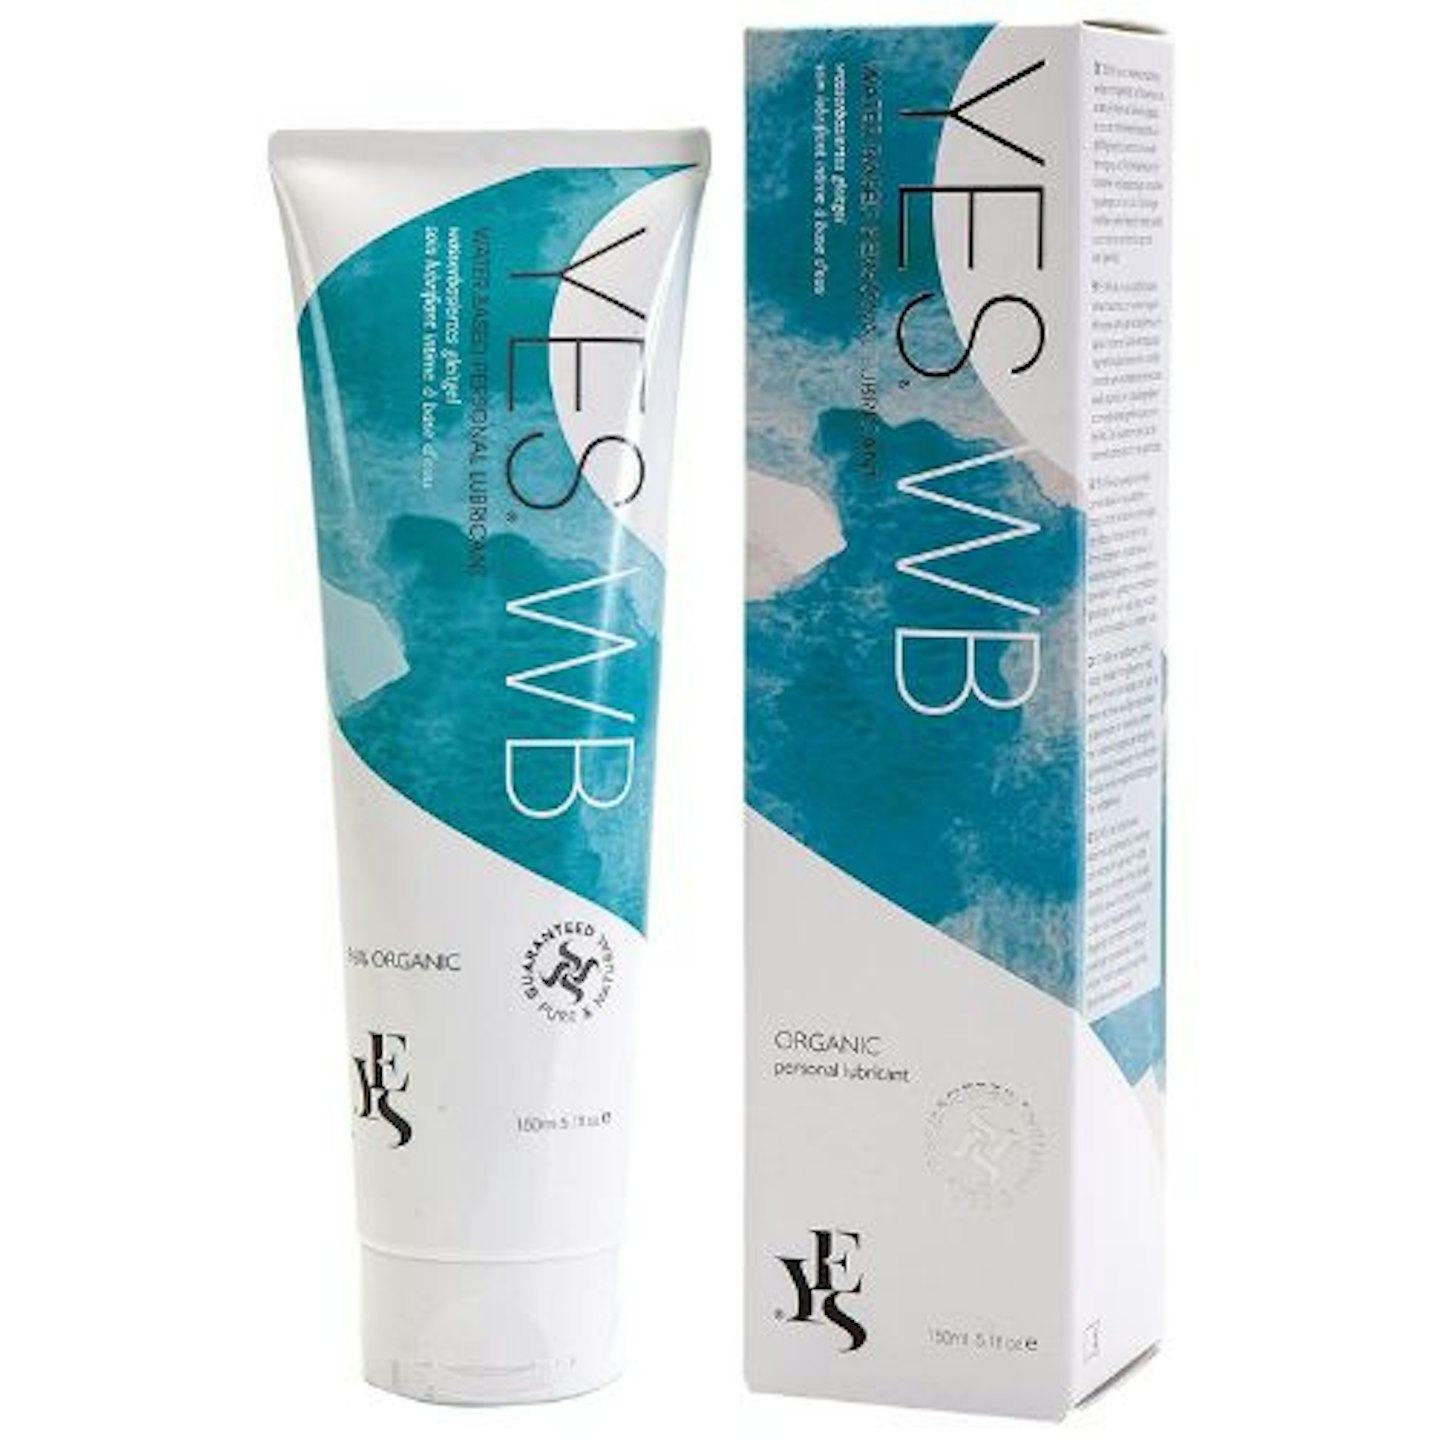 YES WB organic water based natural personal lubricant